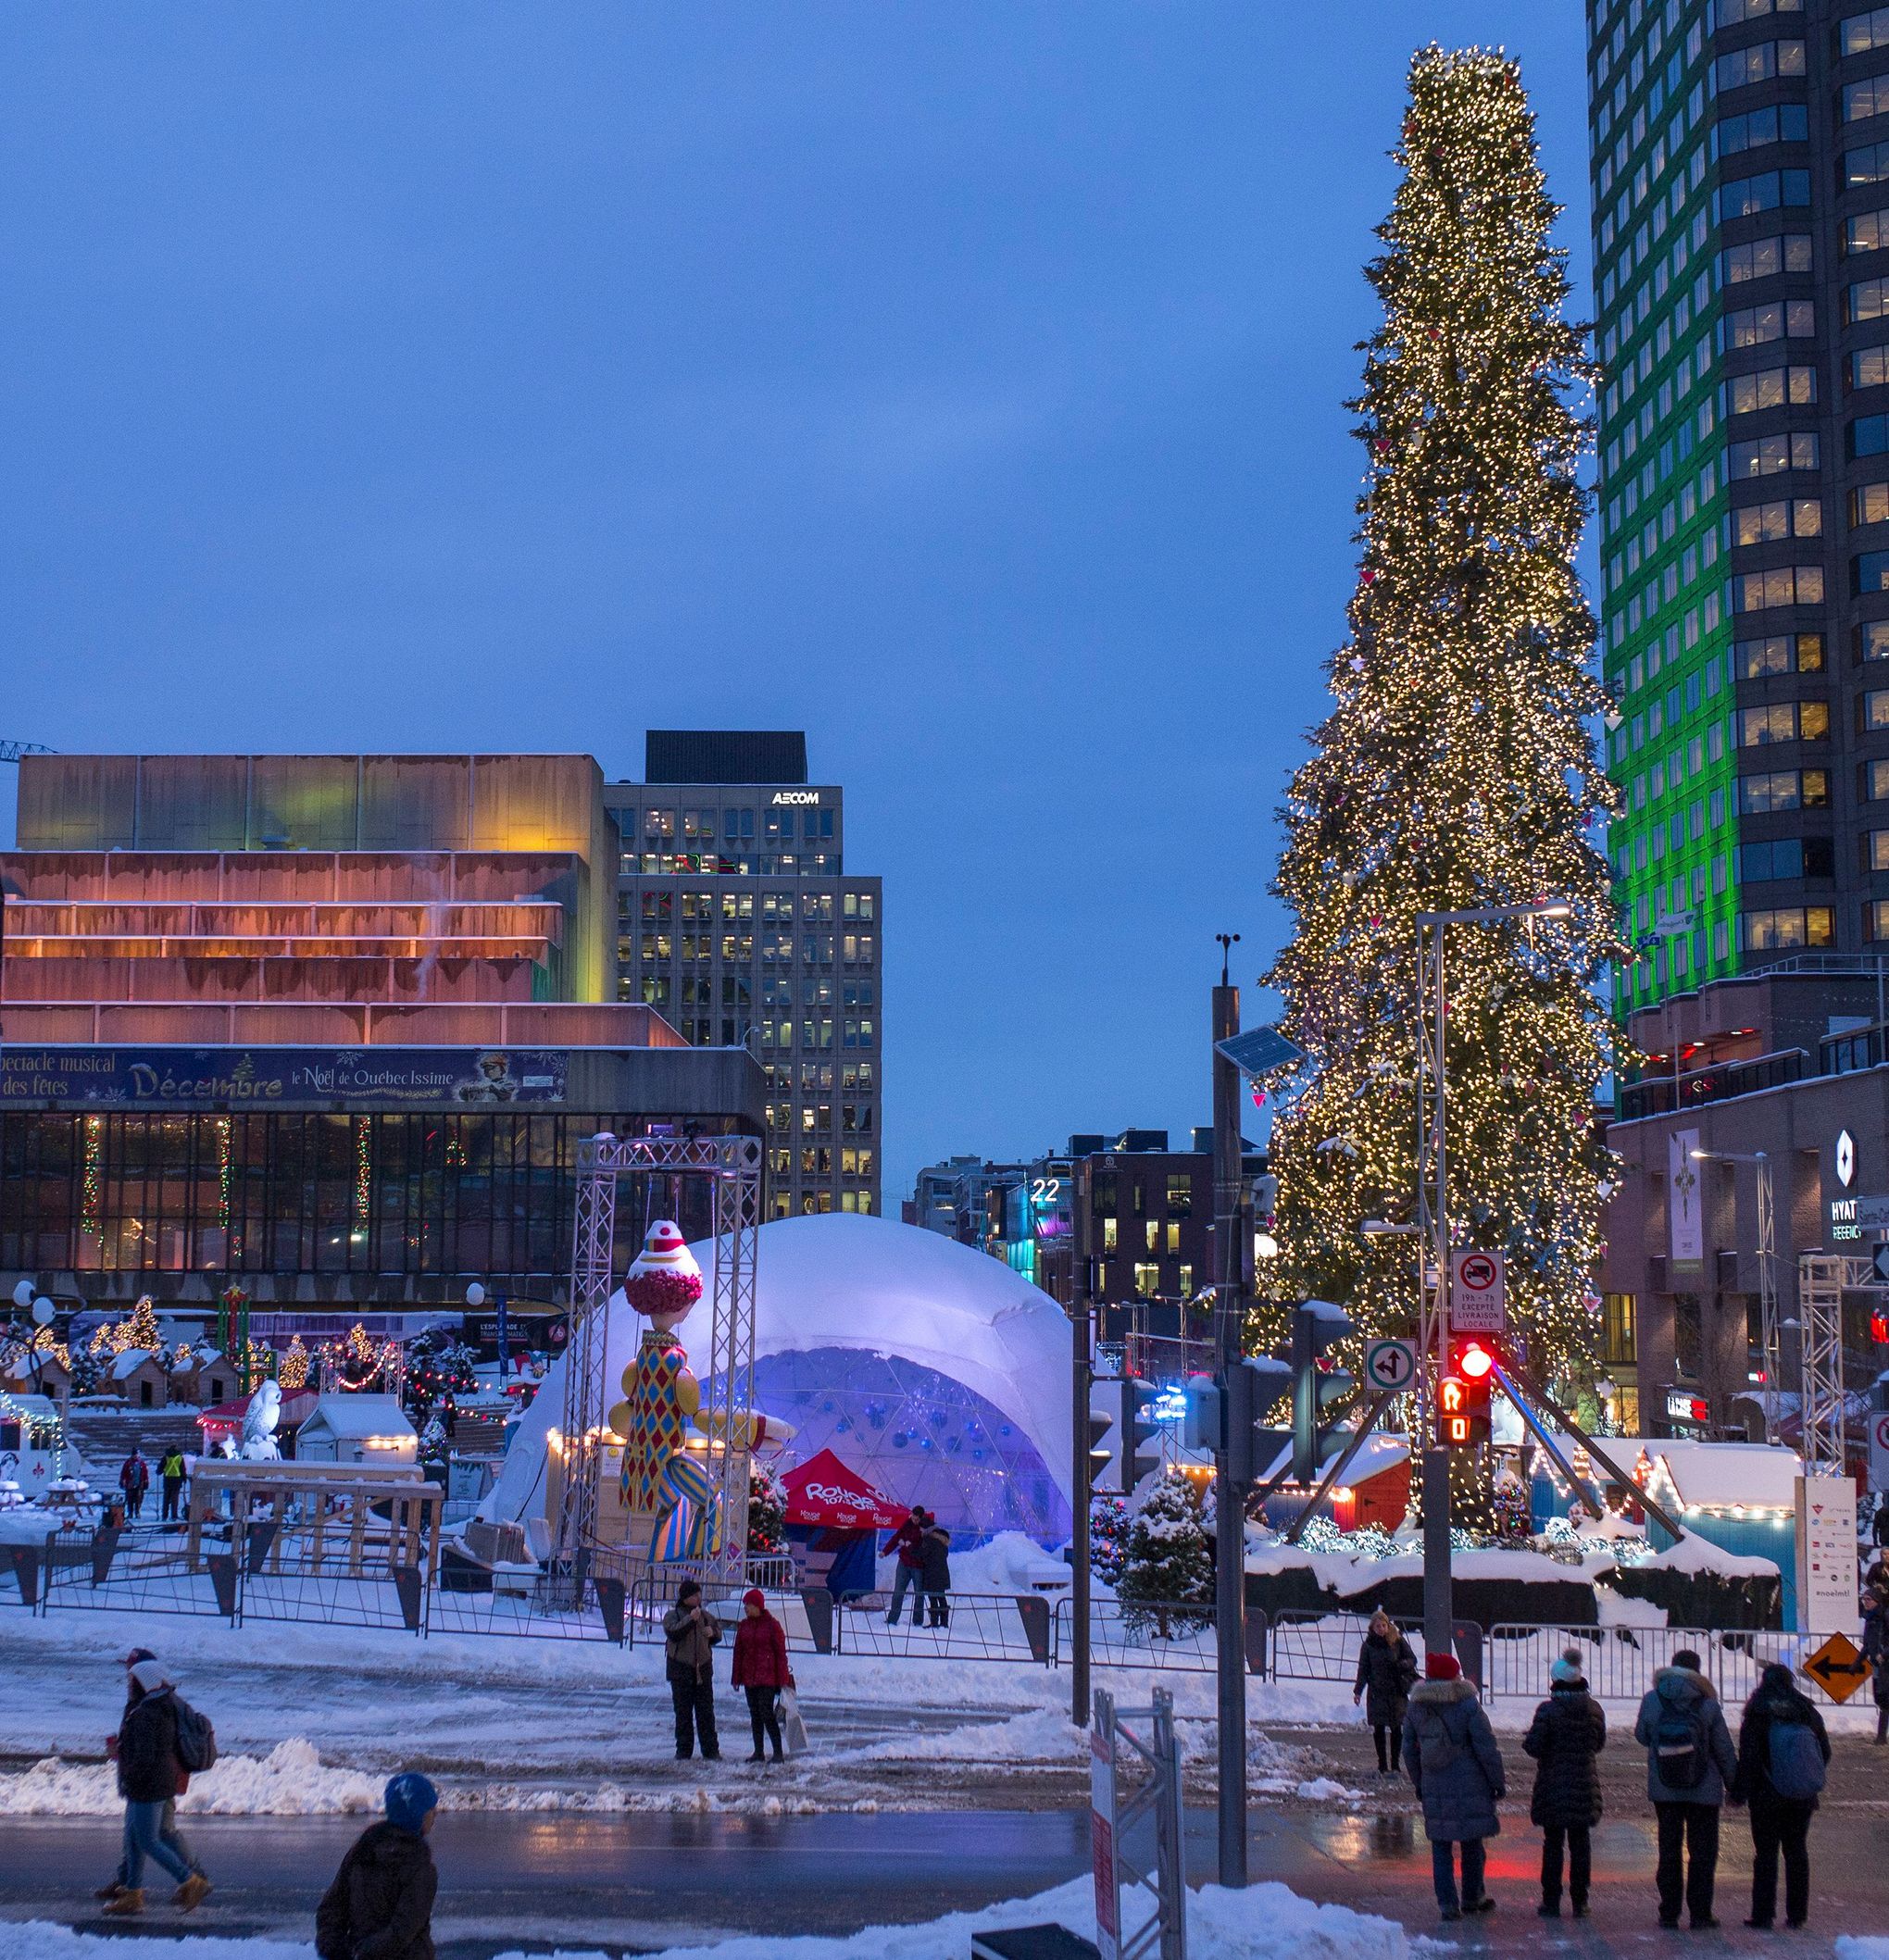 Montreal's laughing at its 'completely awful' Christmas tree